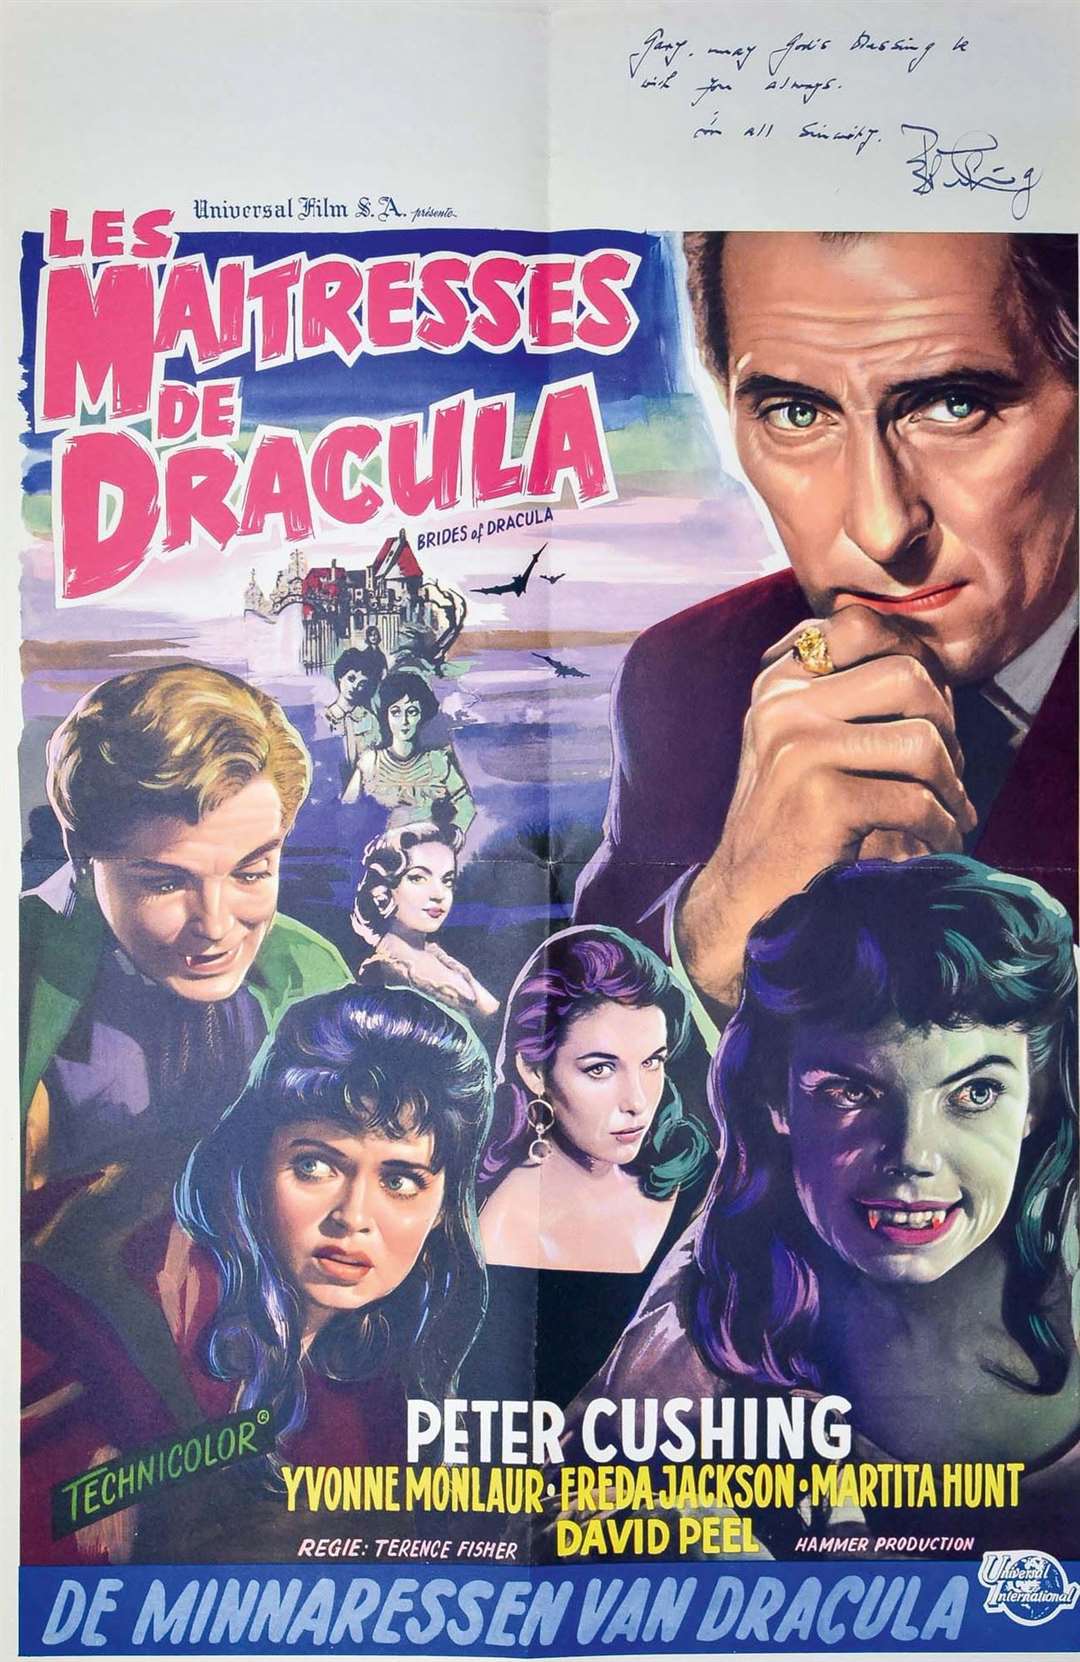 A French Dracula film poster sold for £1,250 - 10 times its estimate